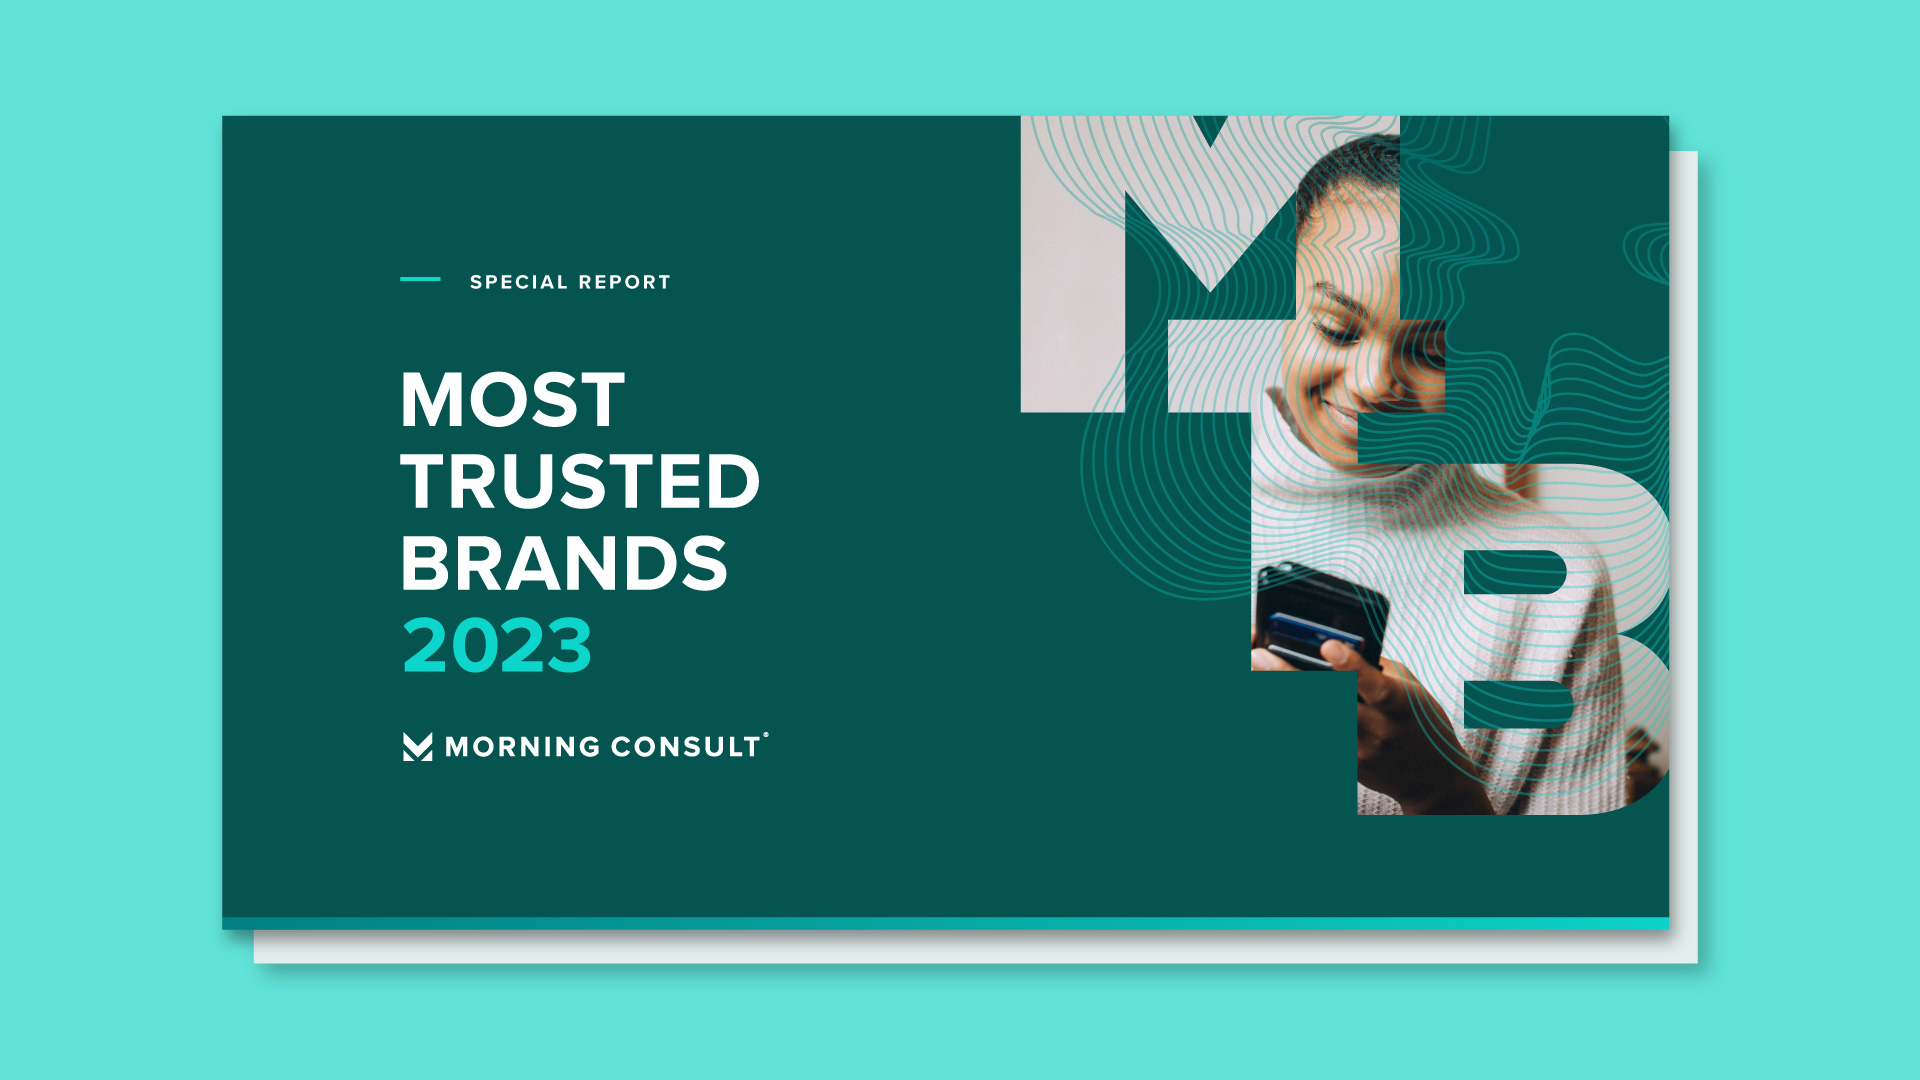 Download the Most Trusted Brands Report 2023